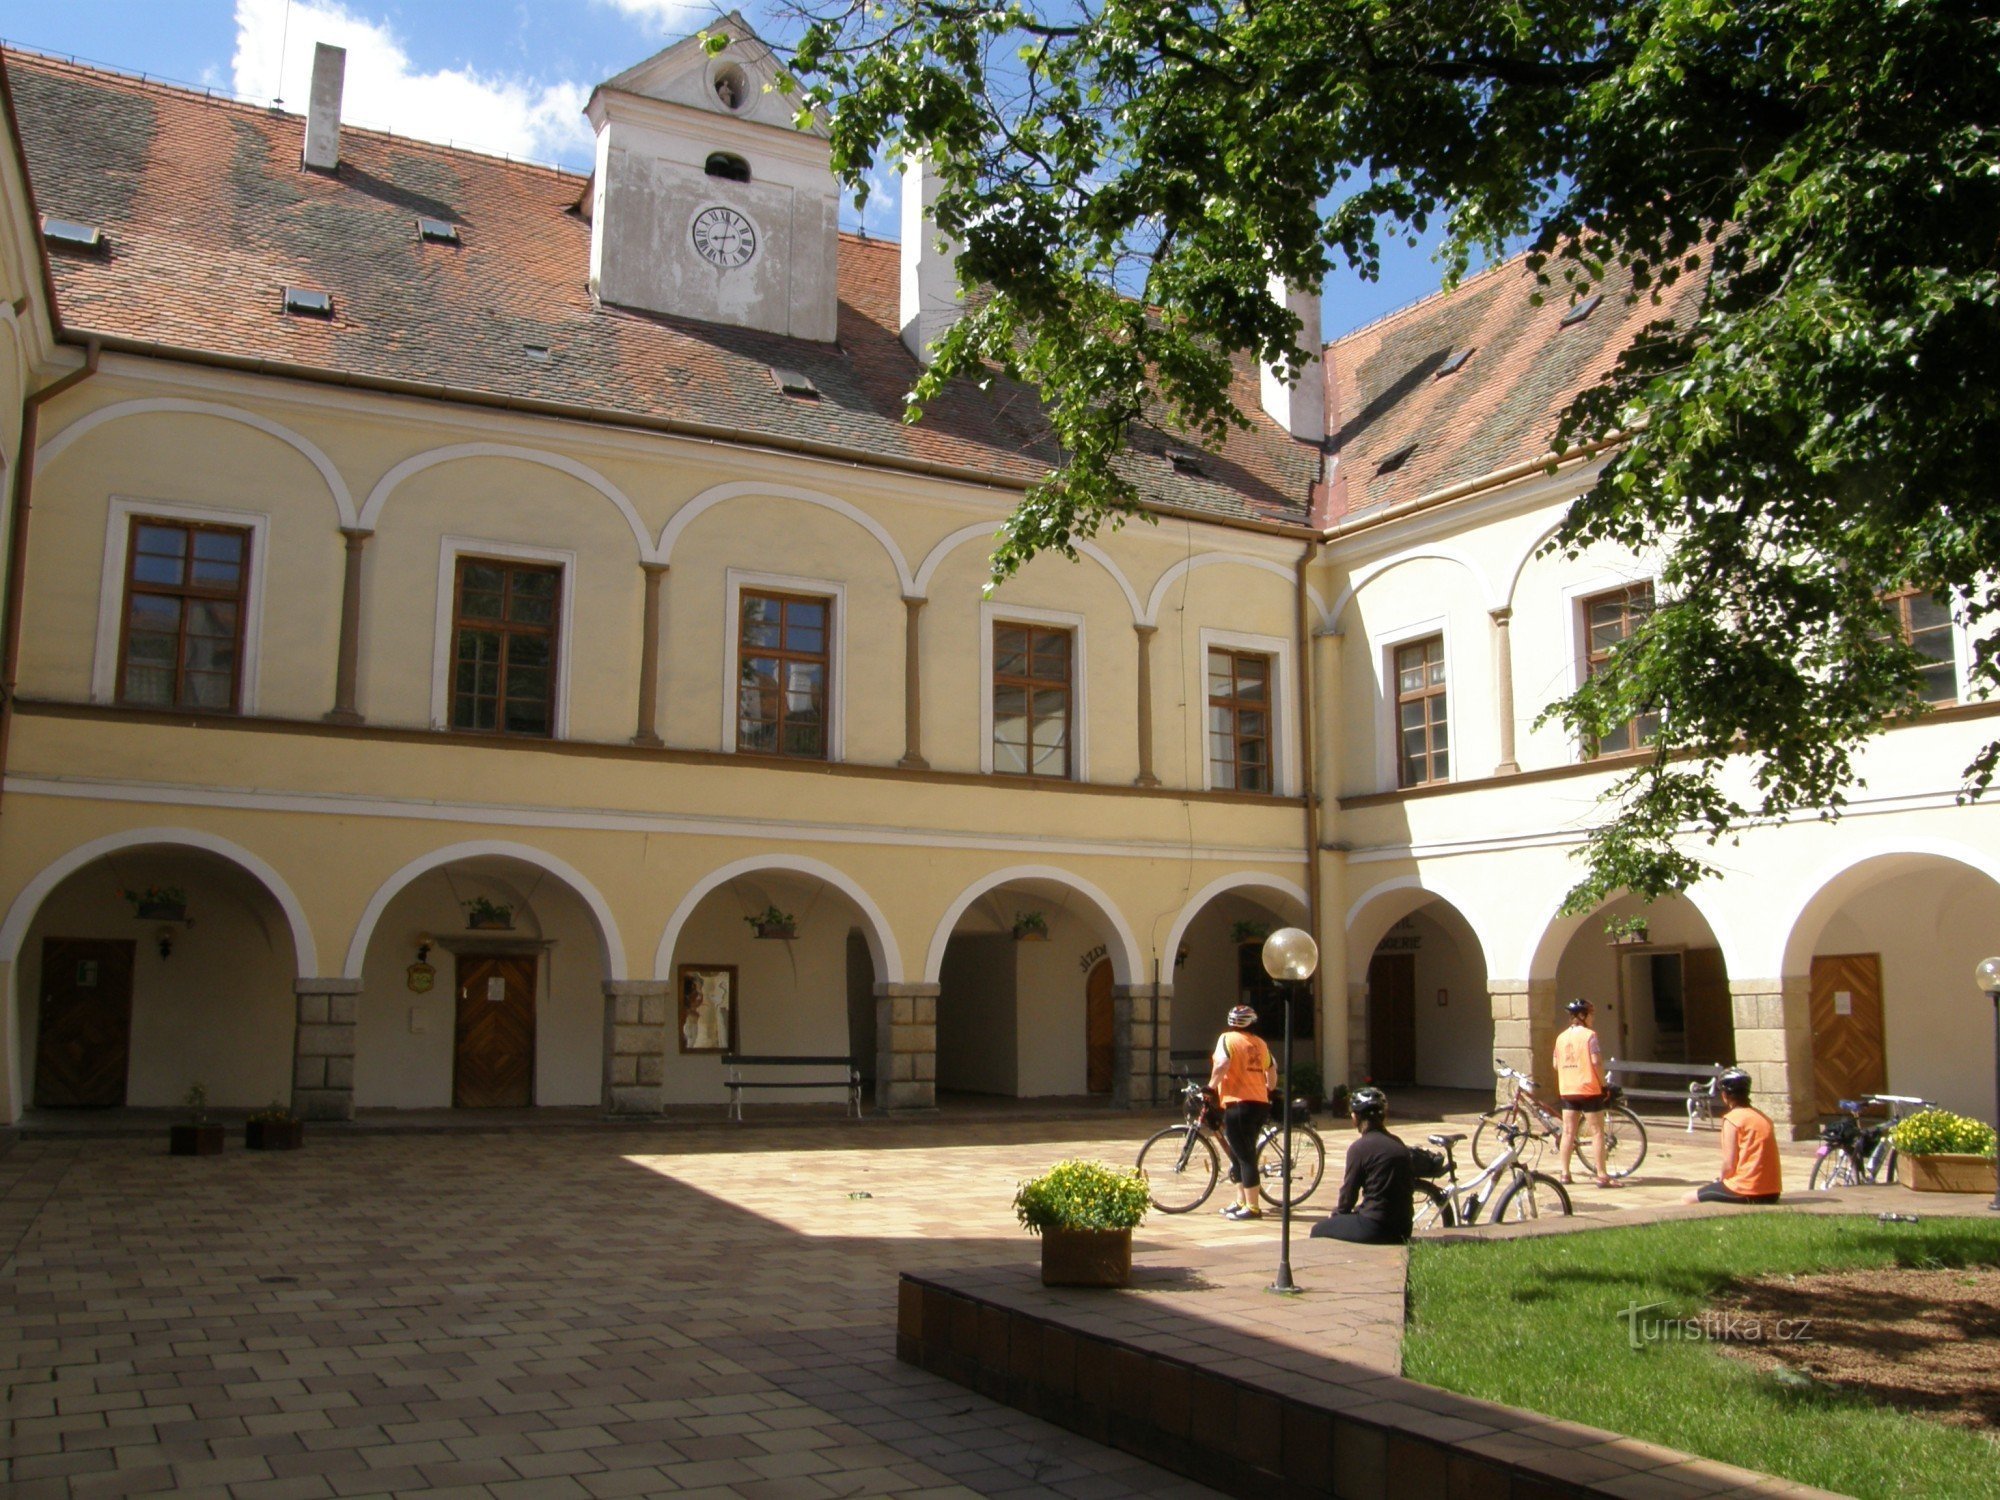 Castle courtyard with arcades